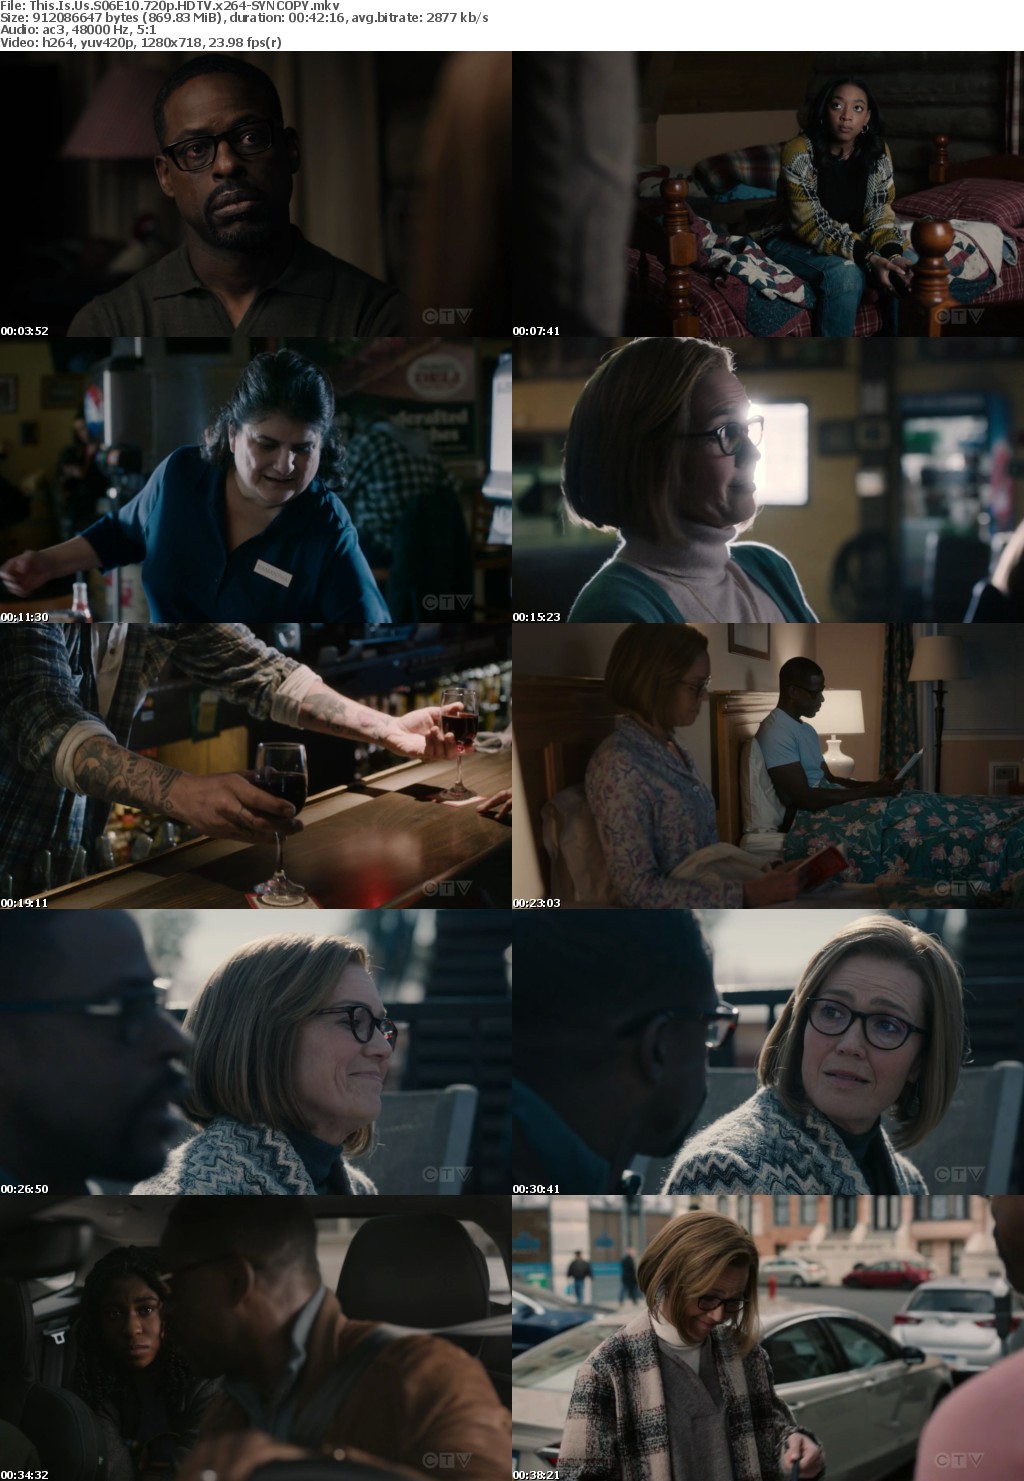 This Is Us S06E10 720p HDTV x264-SYNCOPY